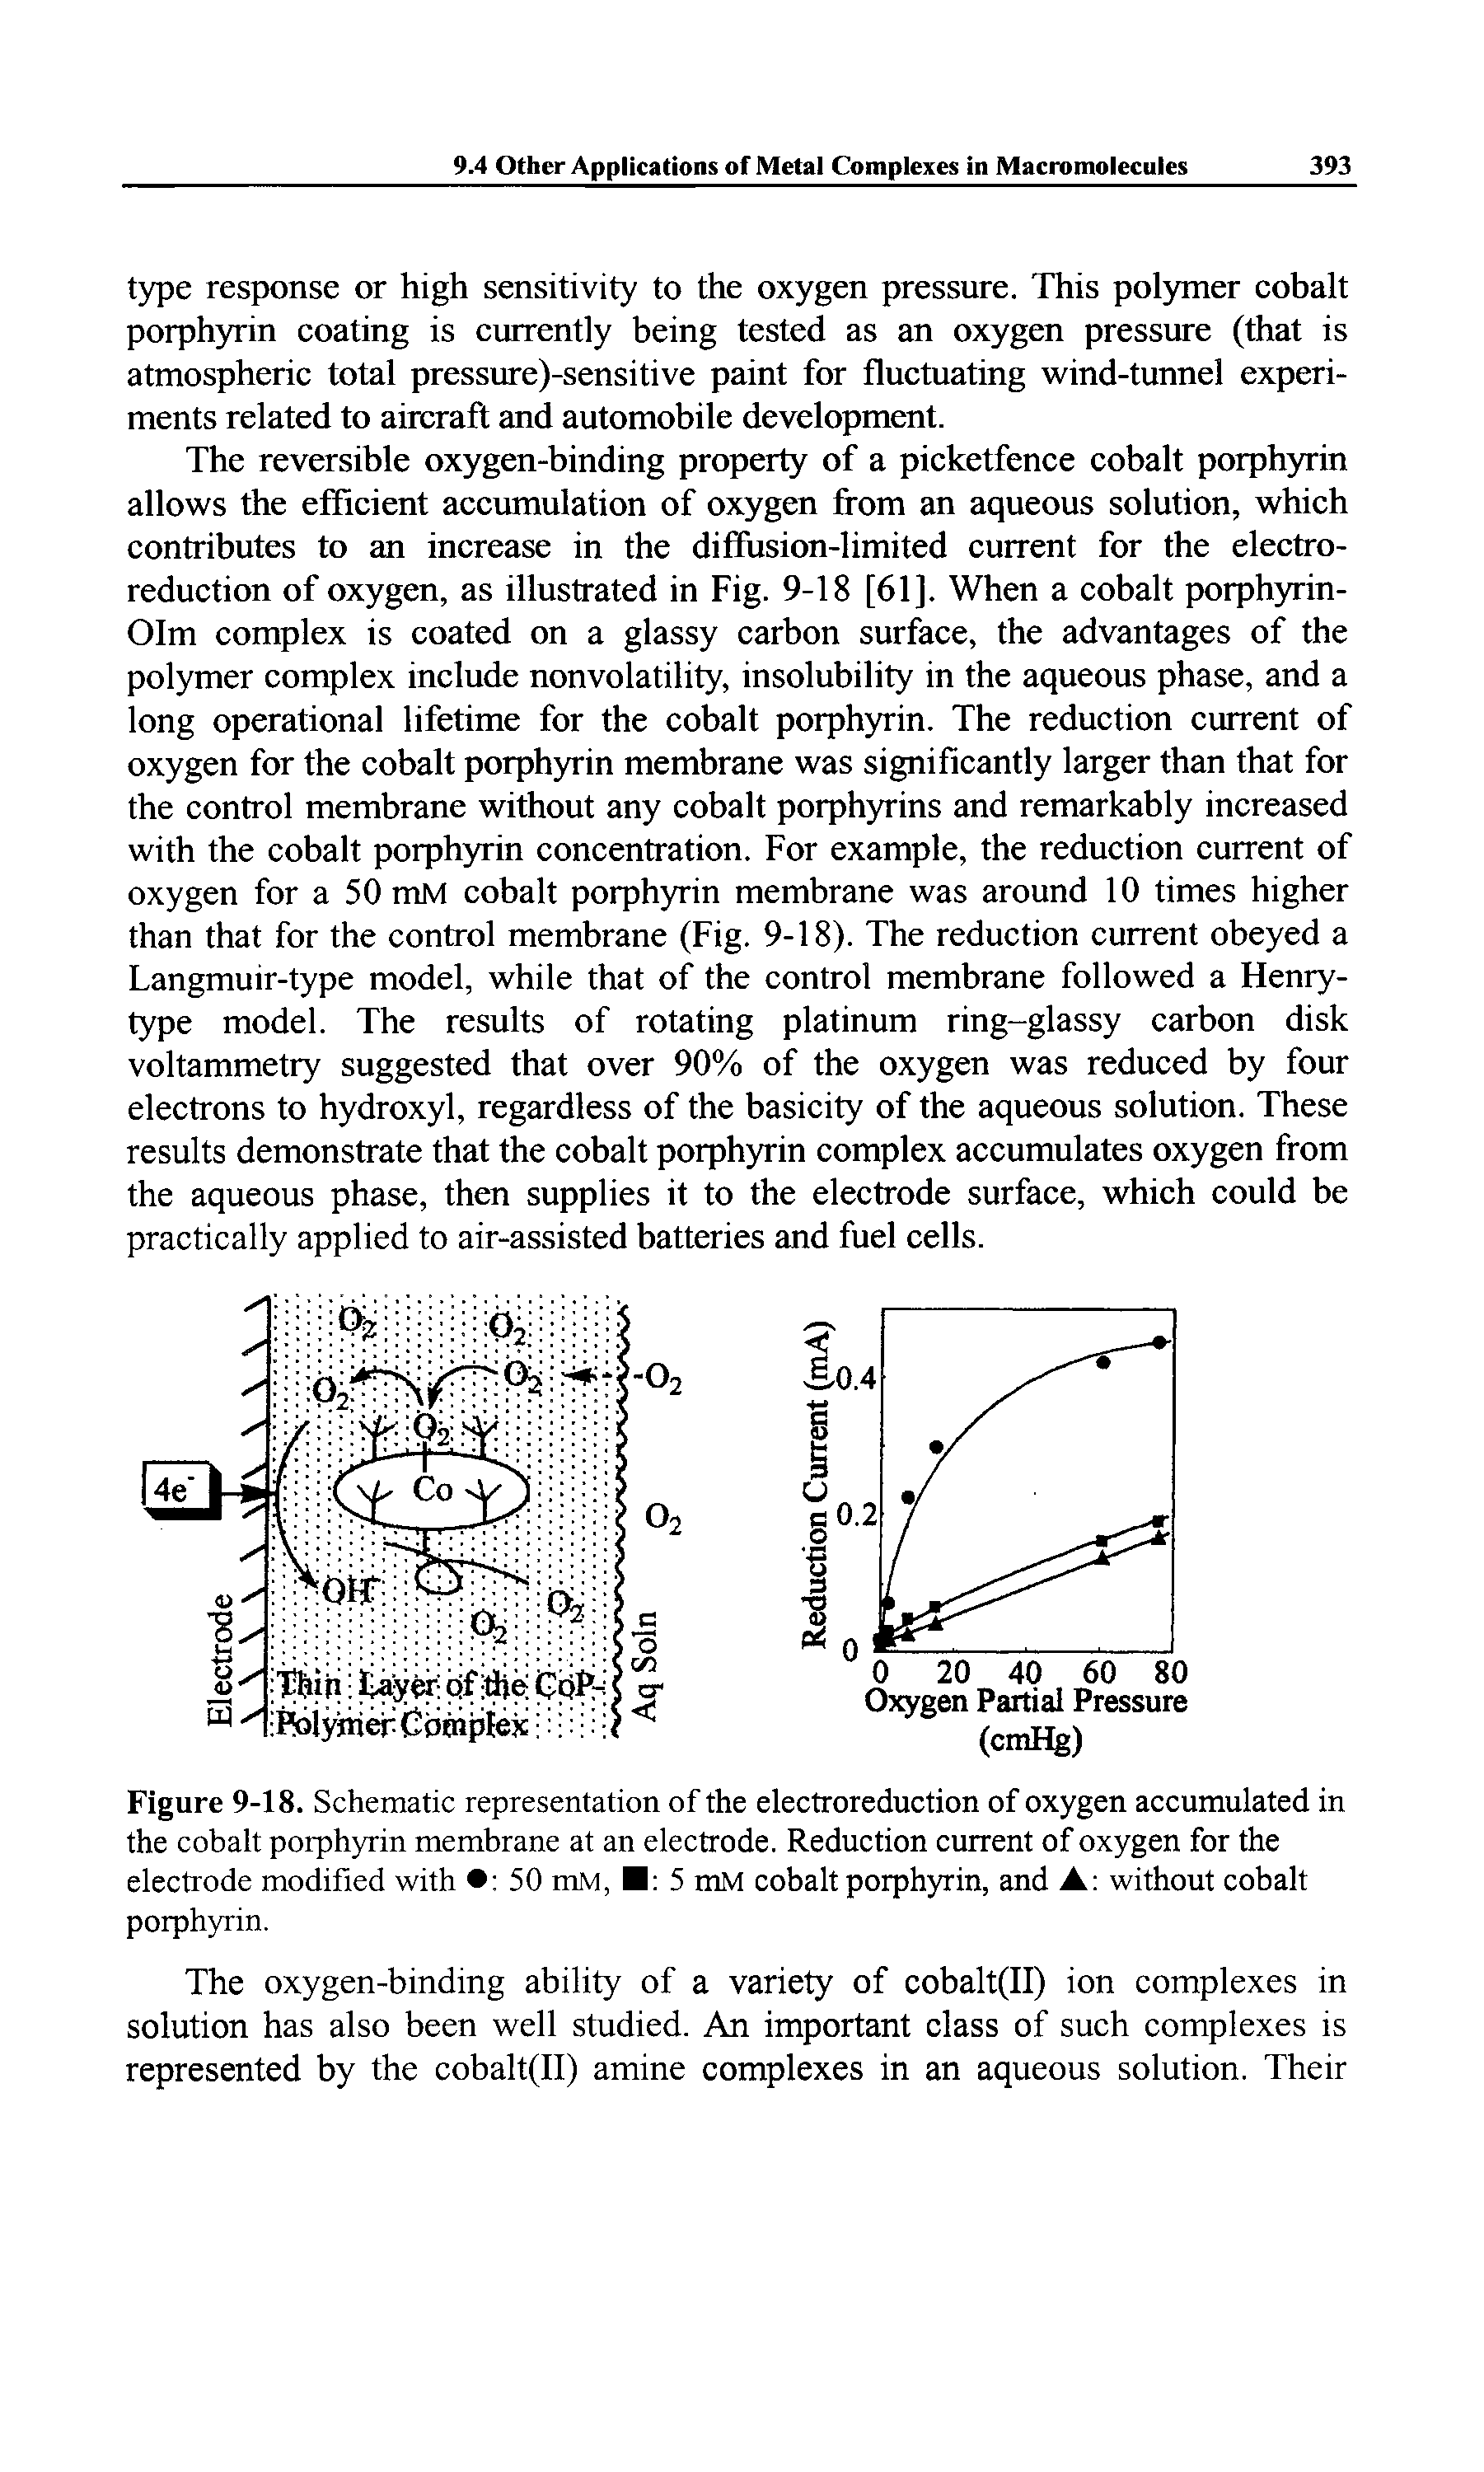 Figure 9-18. Schematic representation of the electroreduction of oxygen accumulated in the cobalt porphyrin membrane at an electrode. Reduction current of oxygen for the electrode modified with 50 mM, 5 mM cobalt porphyrin, and A without cobalt porphyrin.